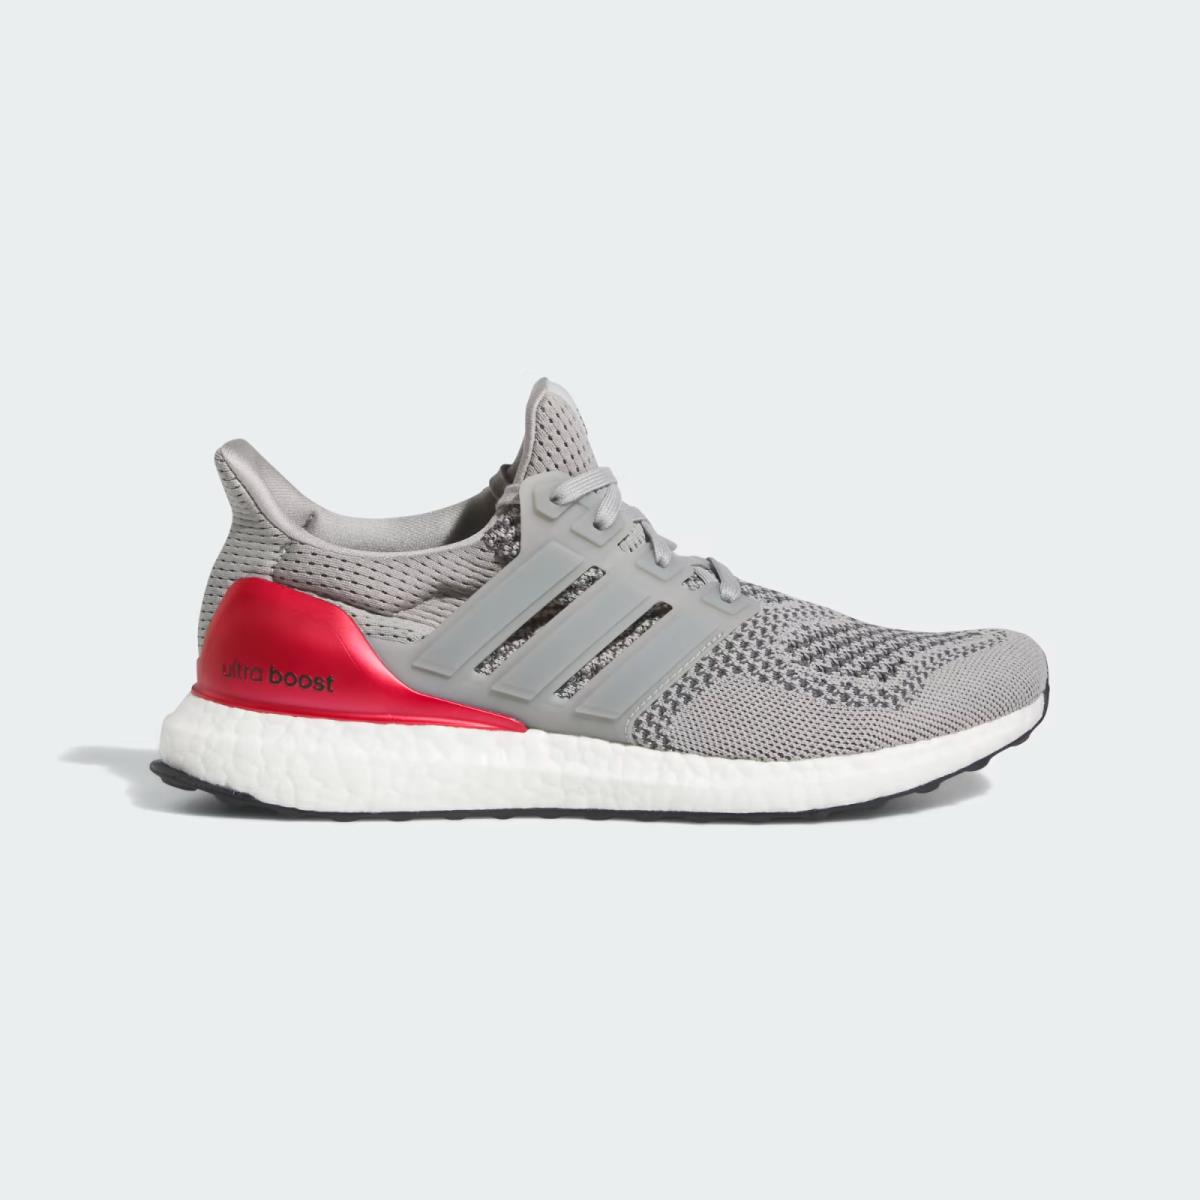 Adidas shoes UltraBoost - Gray 1